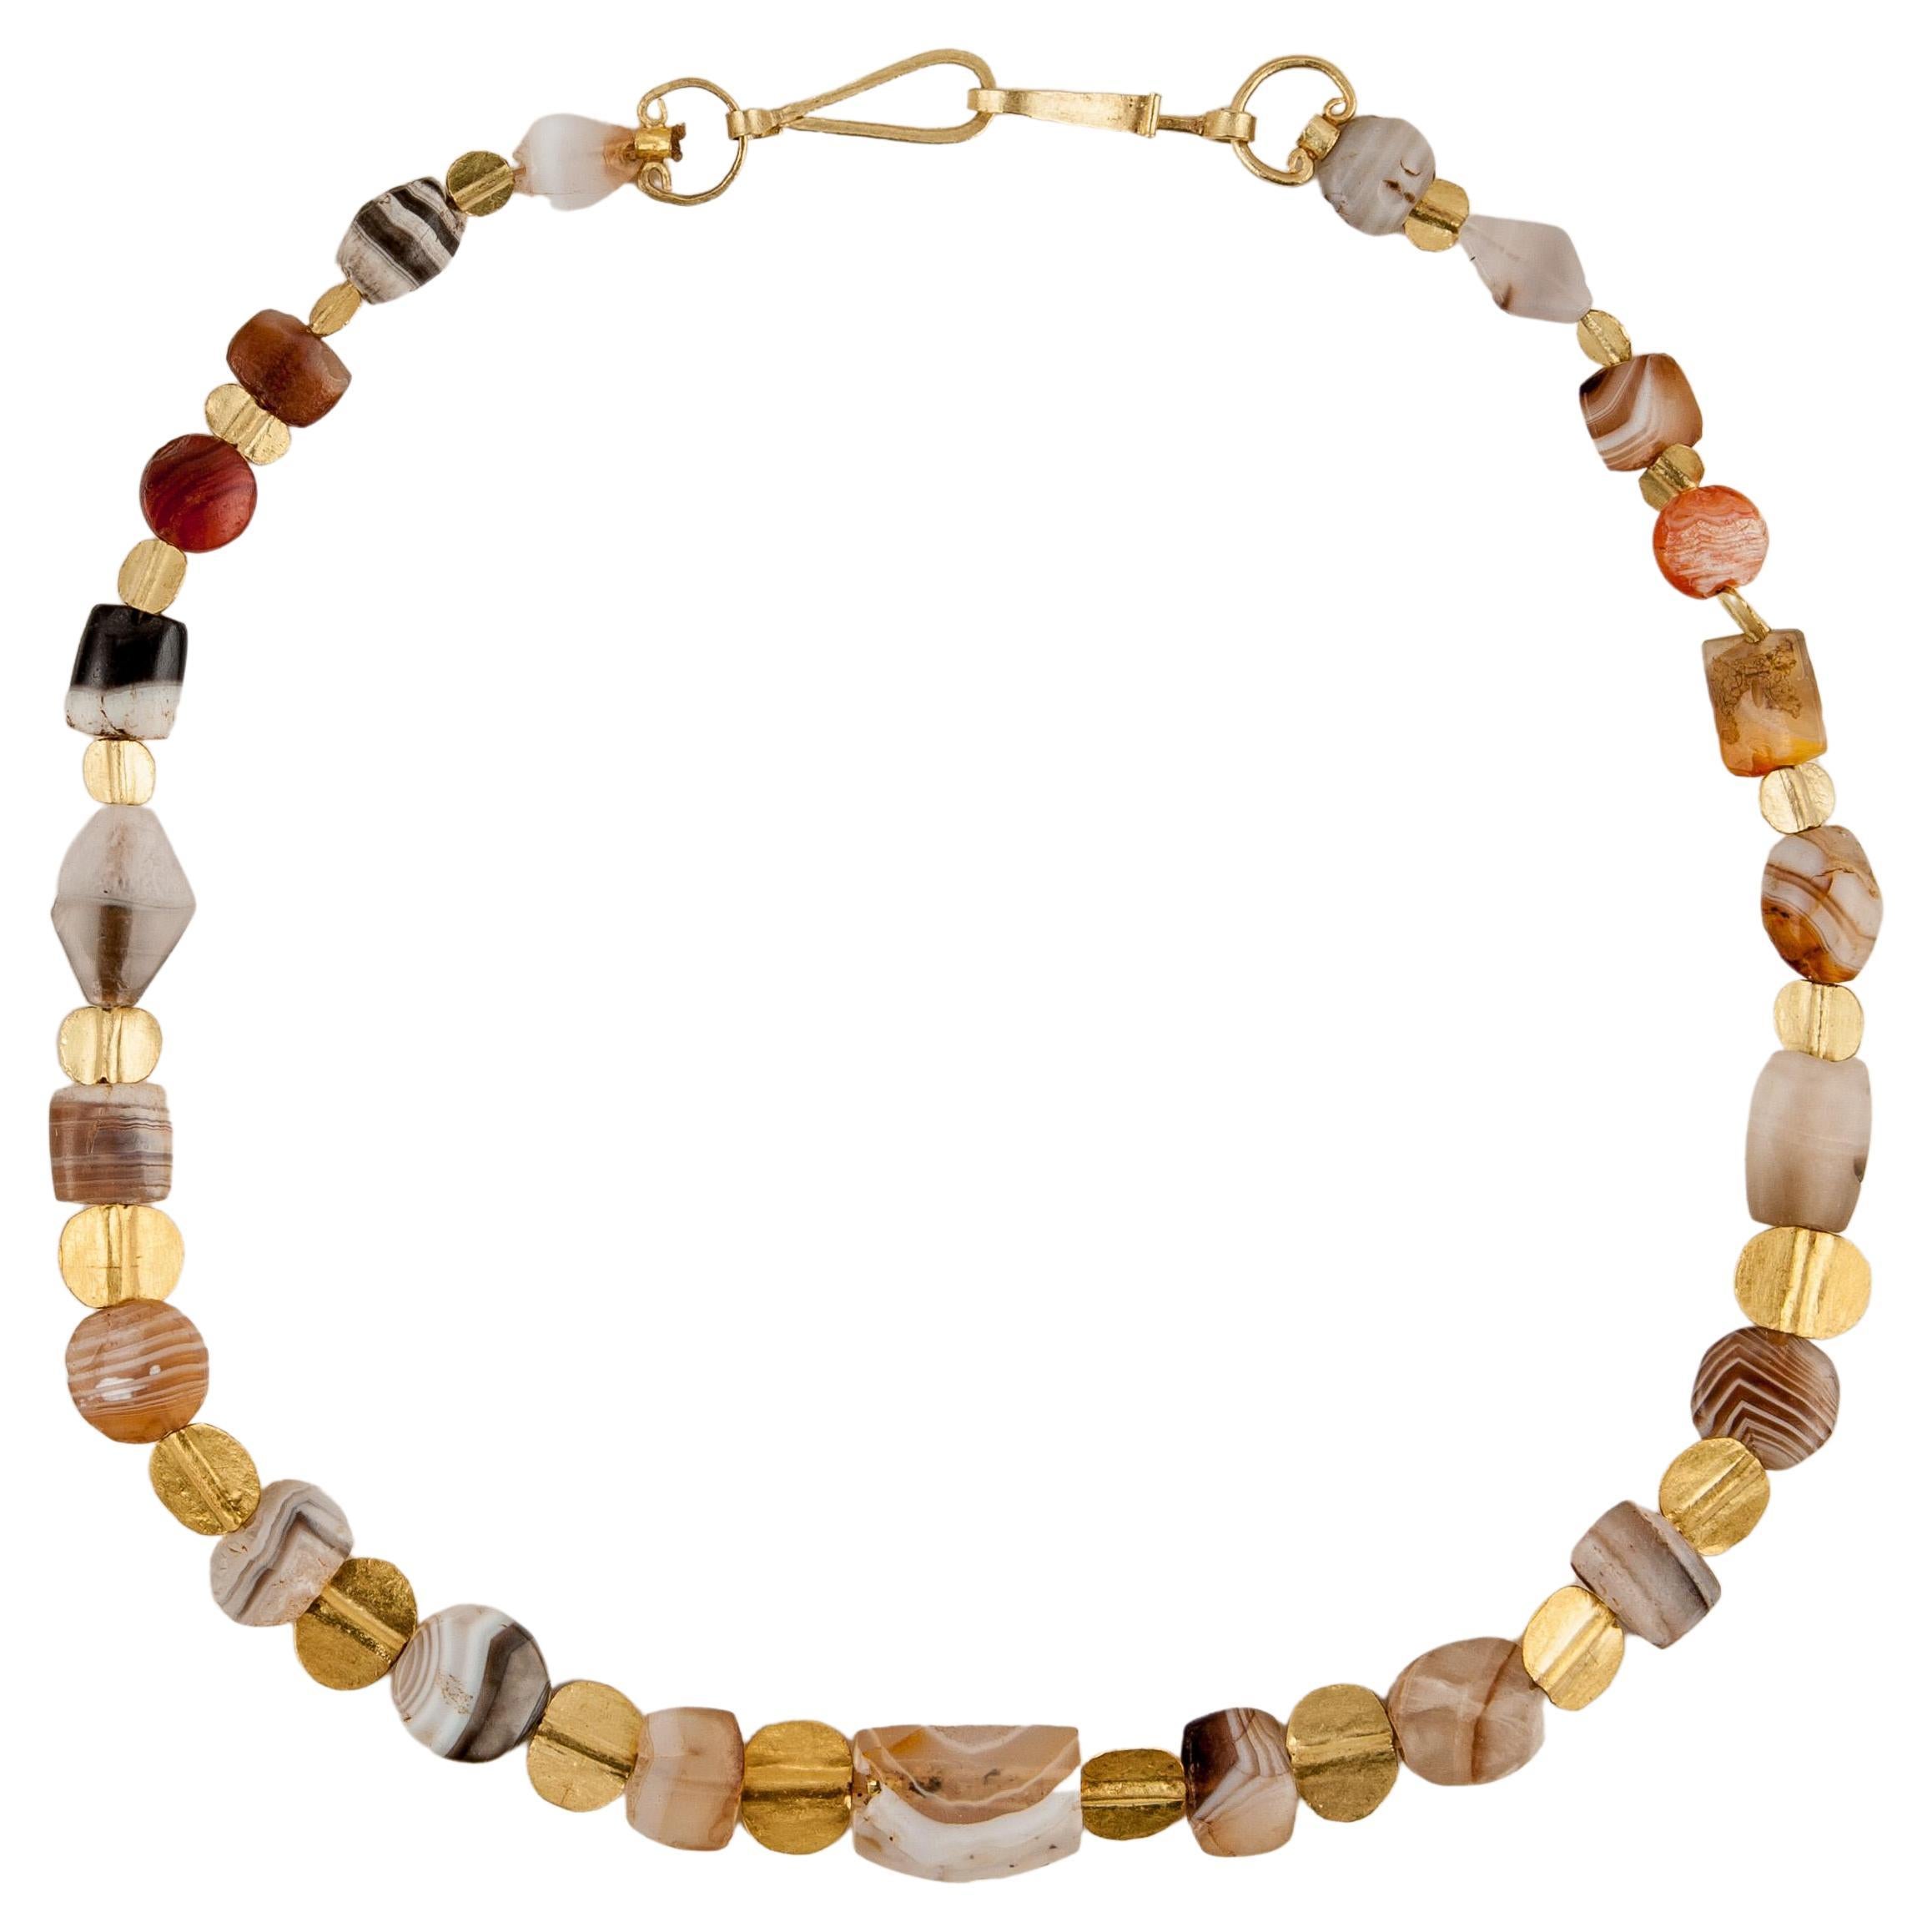 Choker Necklace of Tabular Ancient Agate Beads with 20k Gold Beads and Clasp For Sale